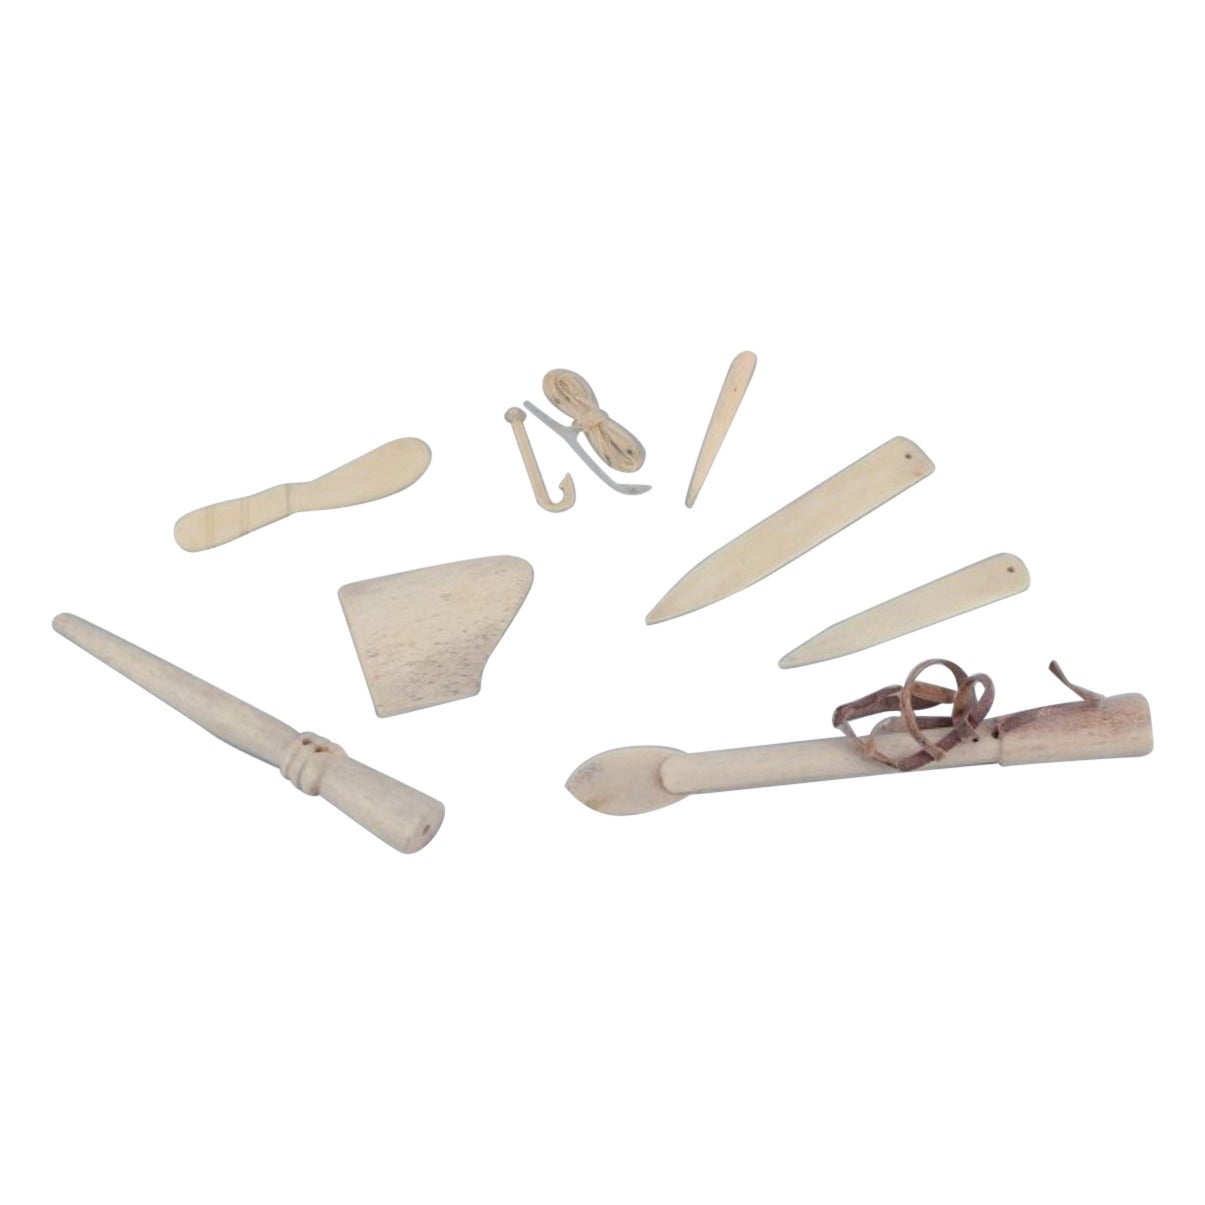 Greenlandica, collection of seven various bone tools For Sale